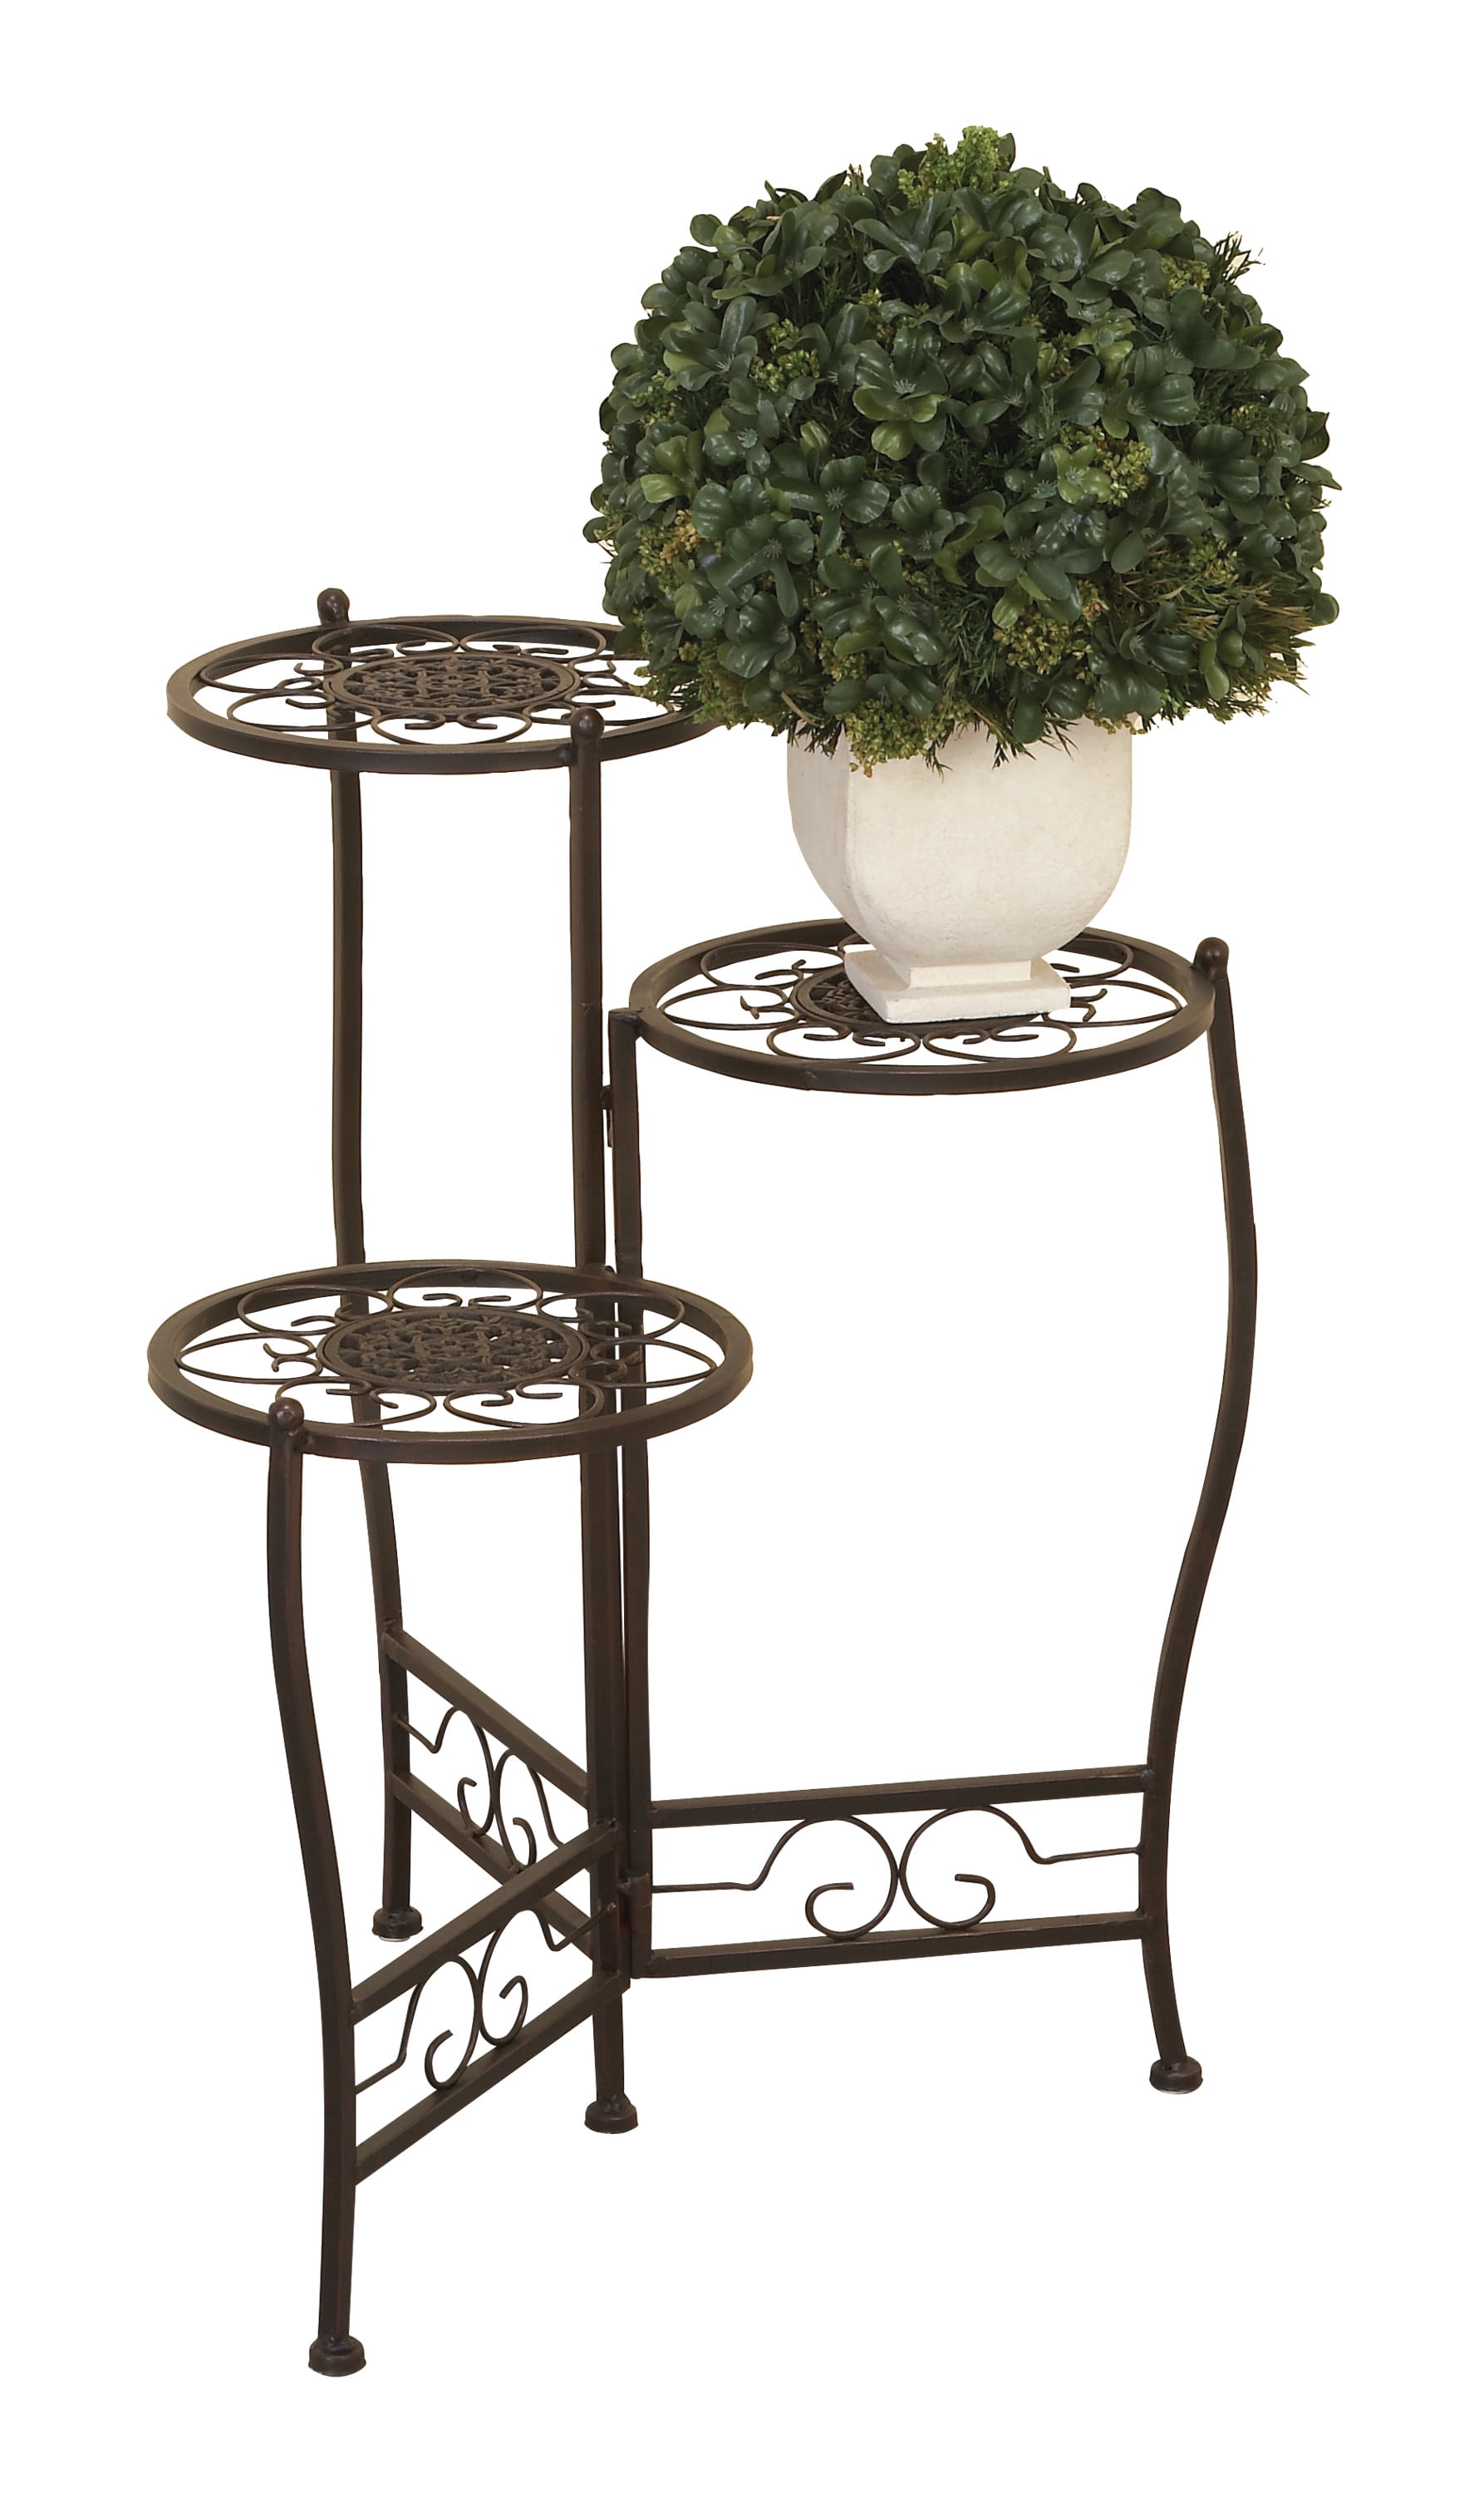 Southern Living at Home Wrought Iron 3-Tier Plate Stand Holder Rack Black